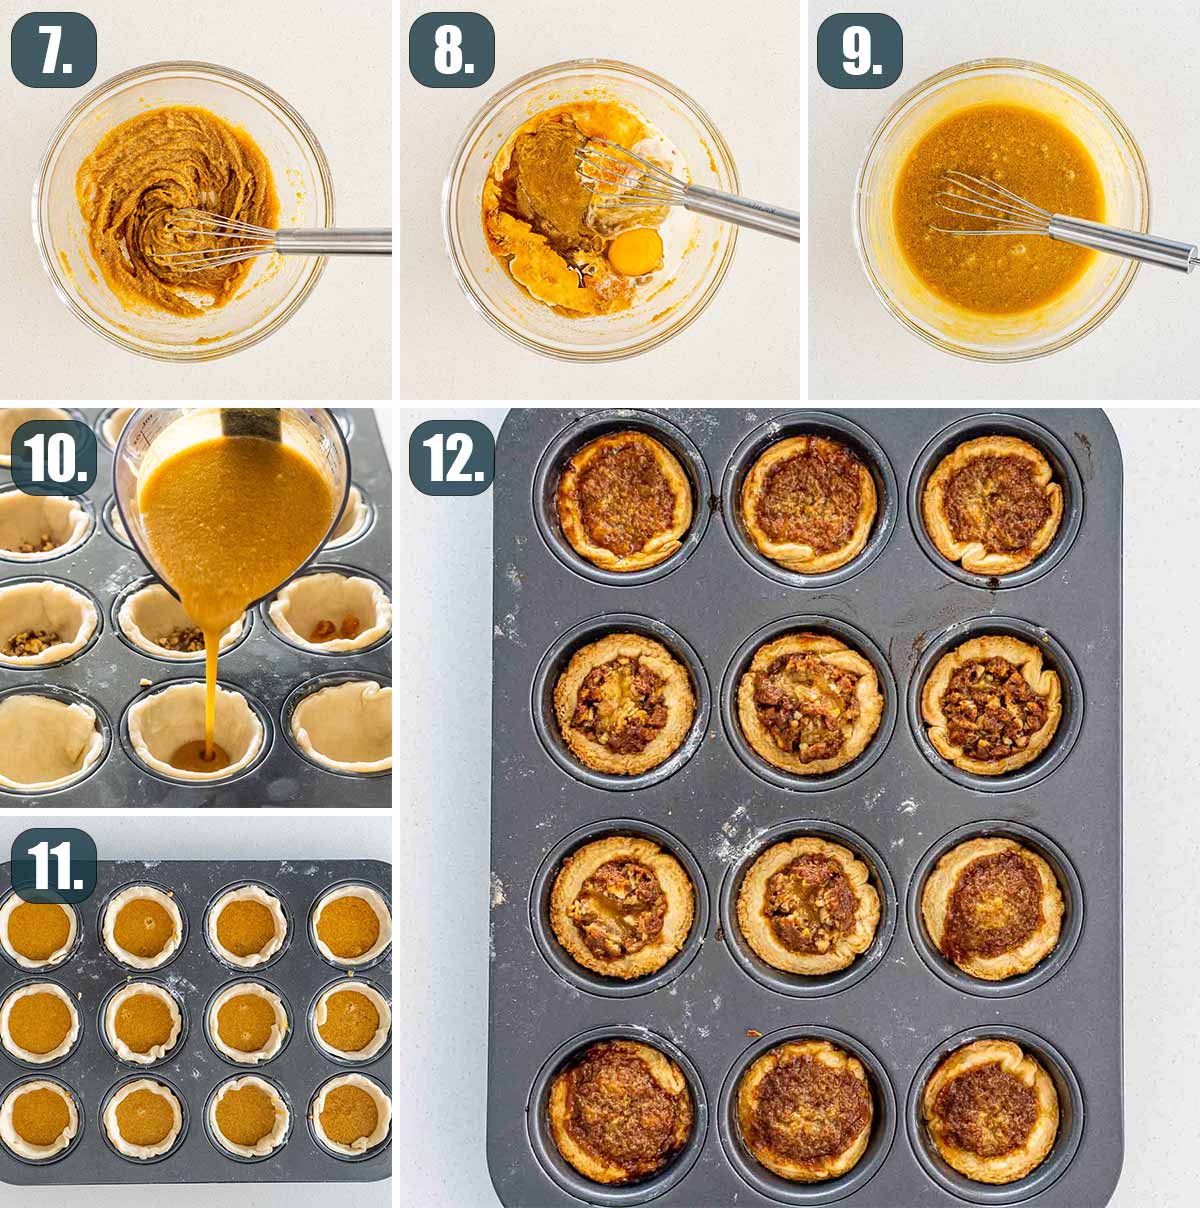 process shots showing how to make filling and assemble butter tarts.